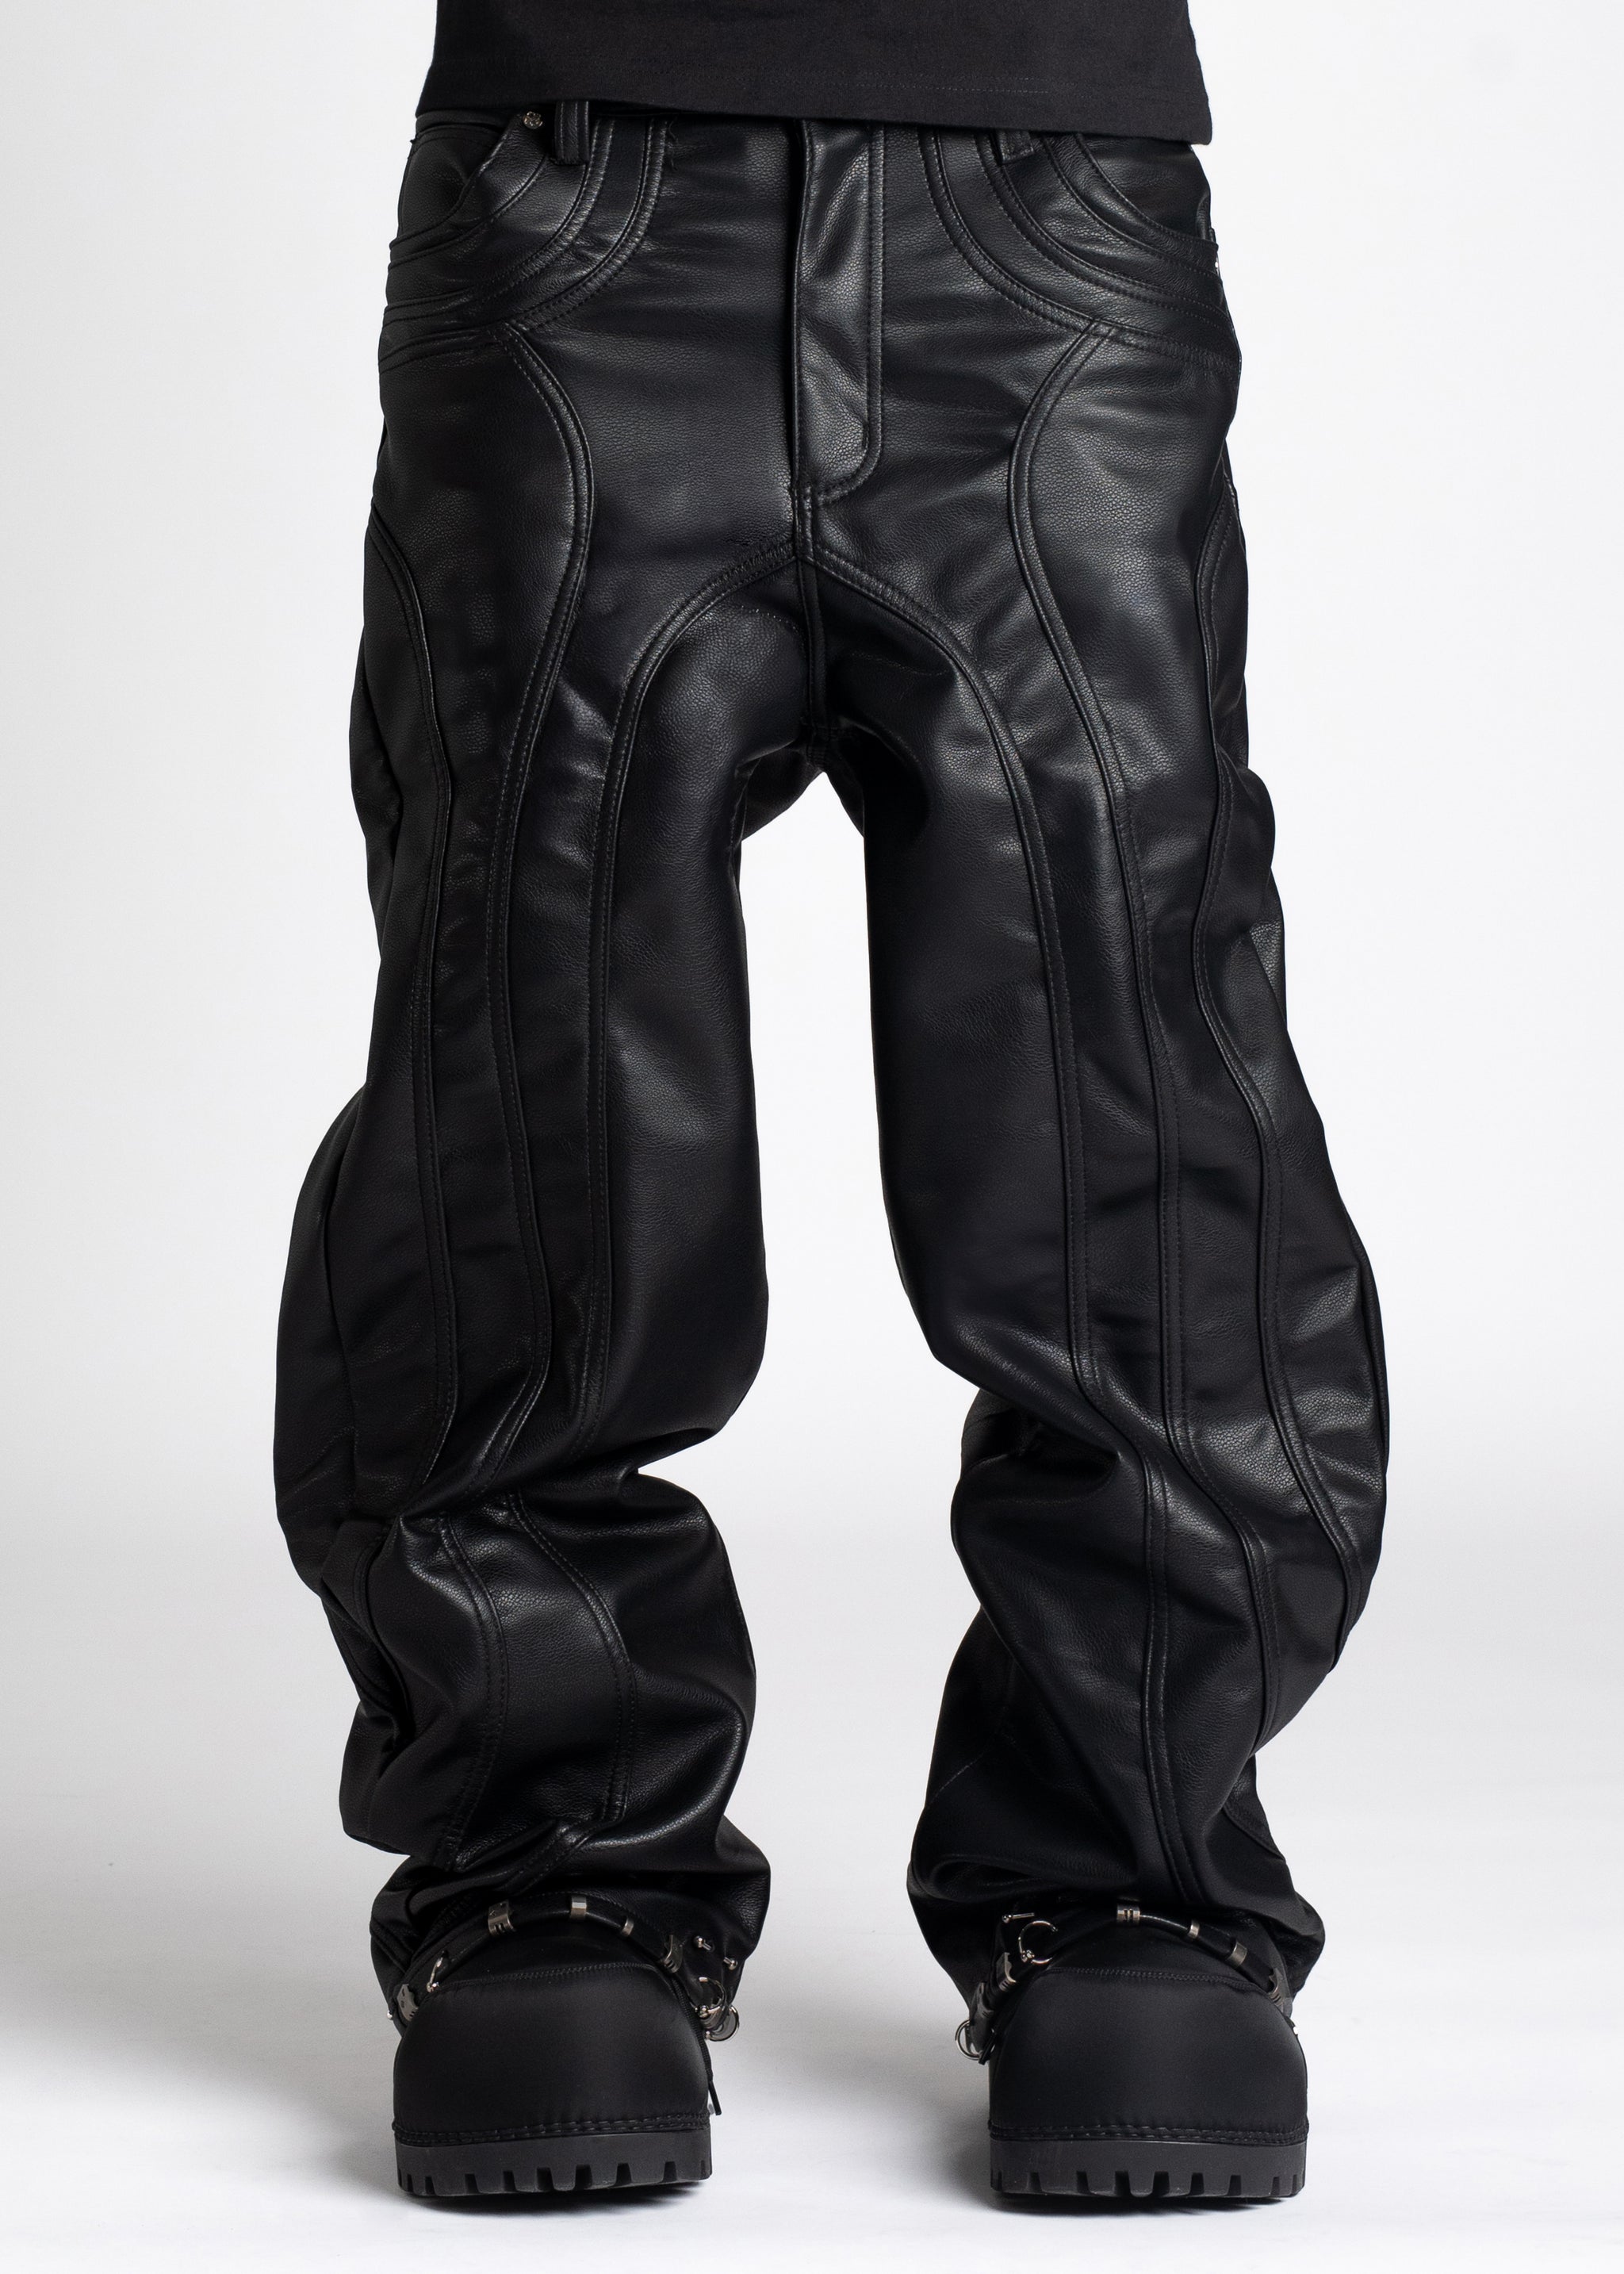 Obsidian Black Piercing Leather Pant